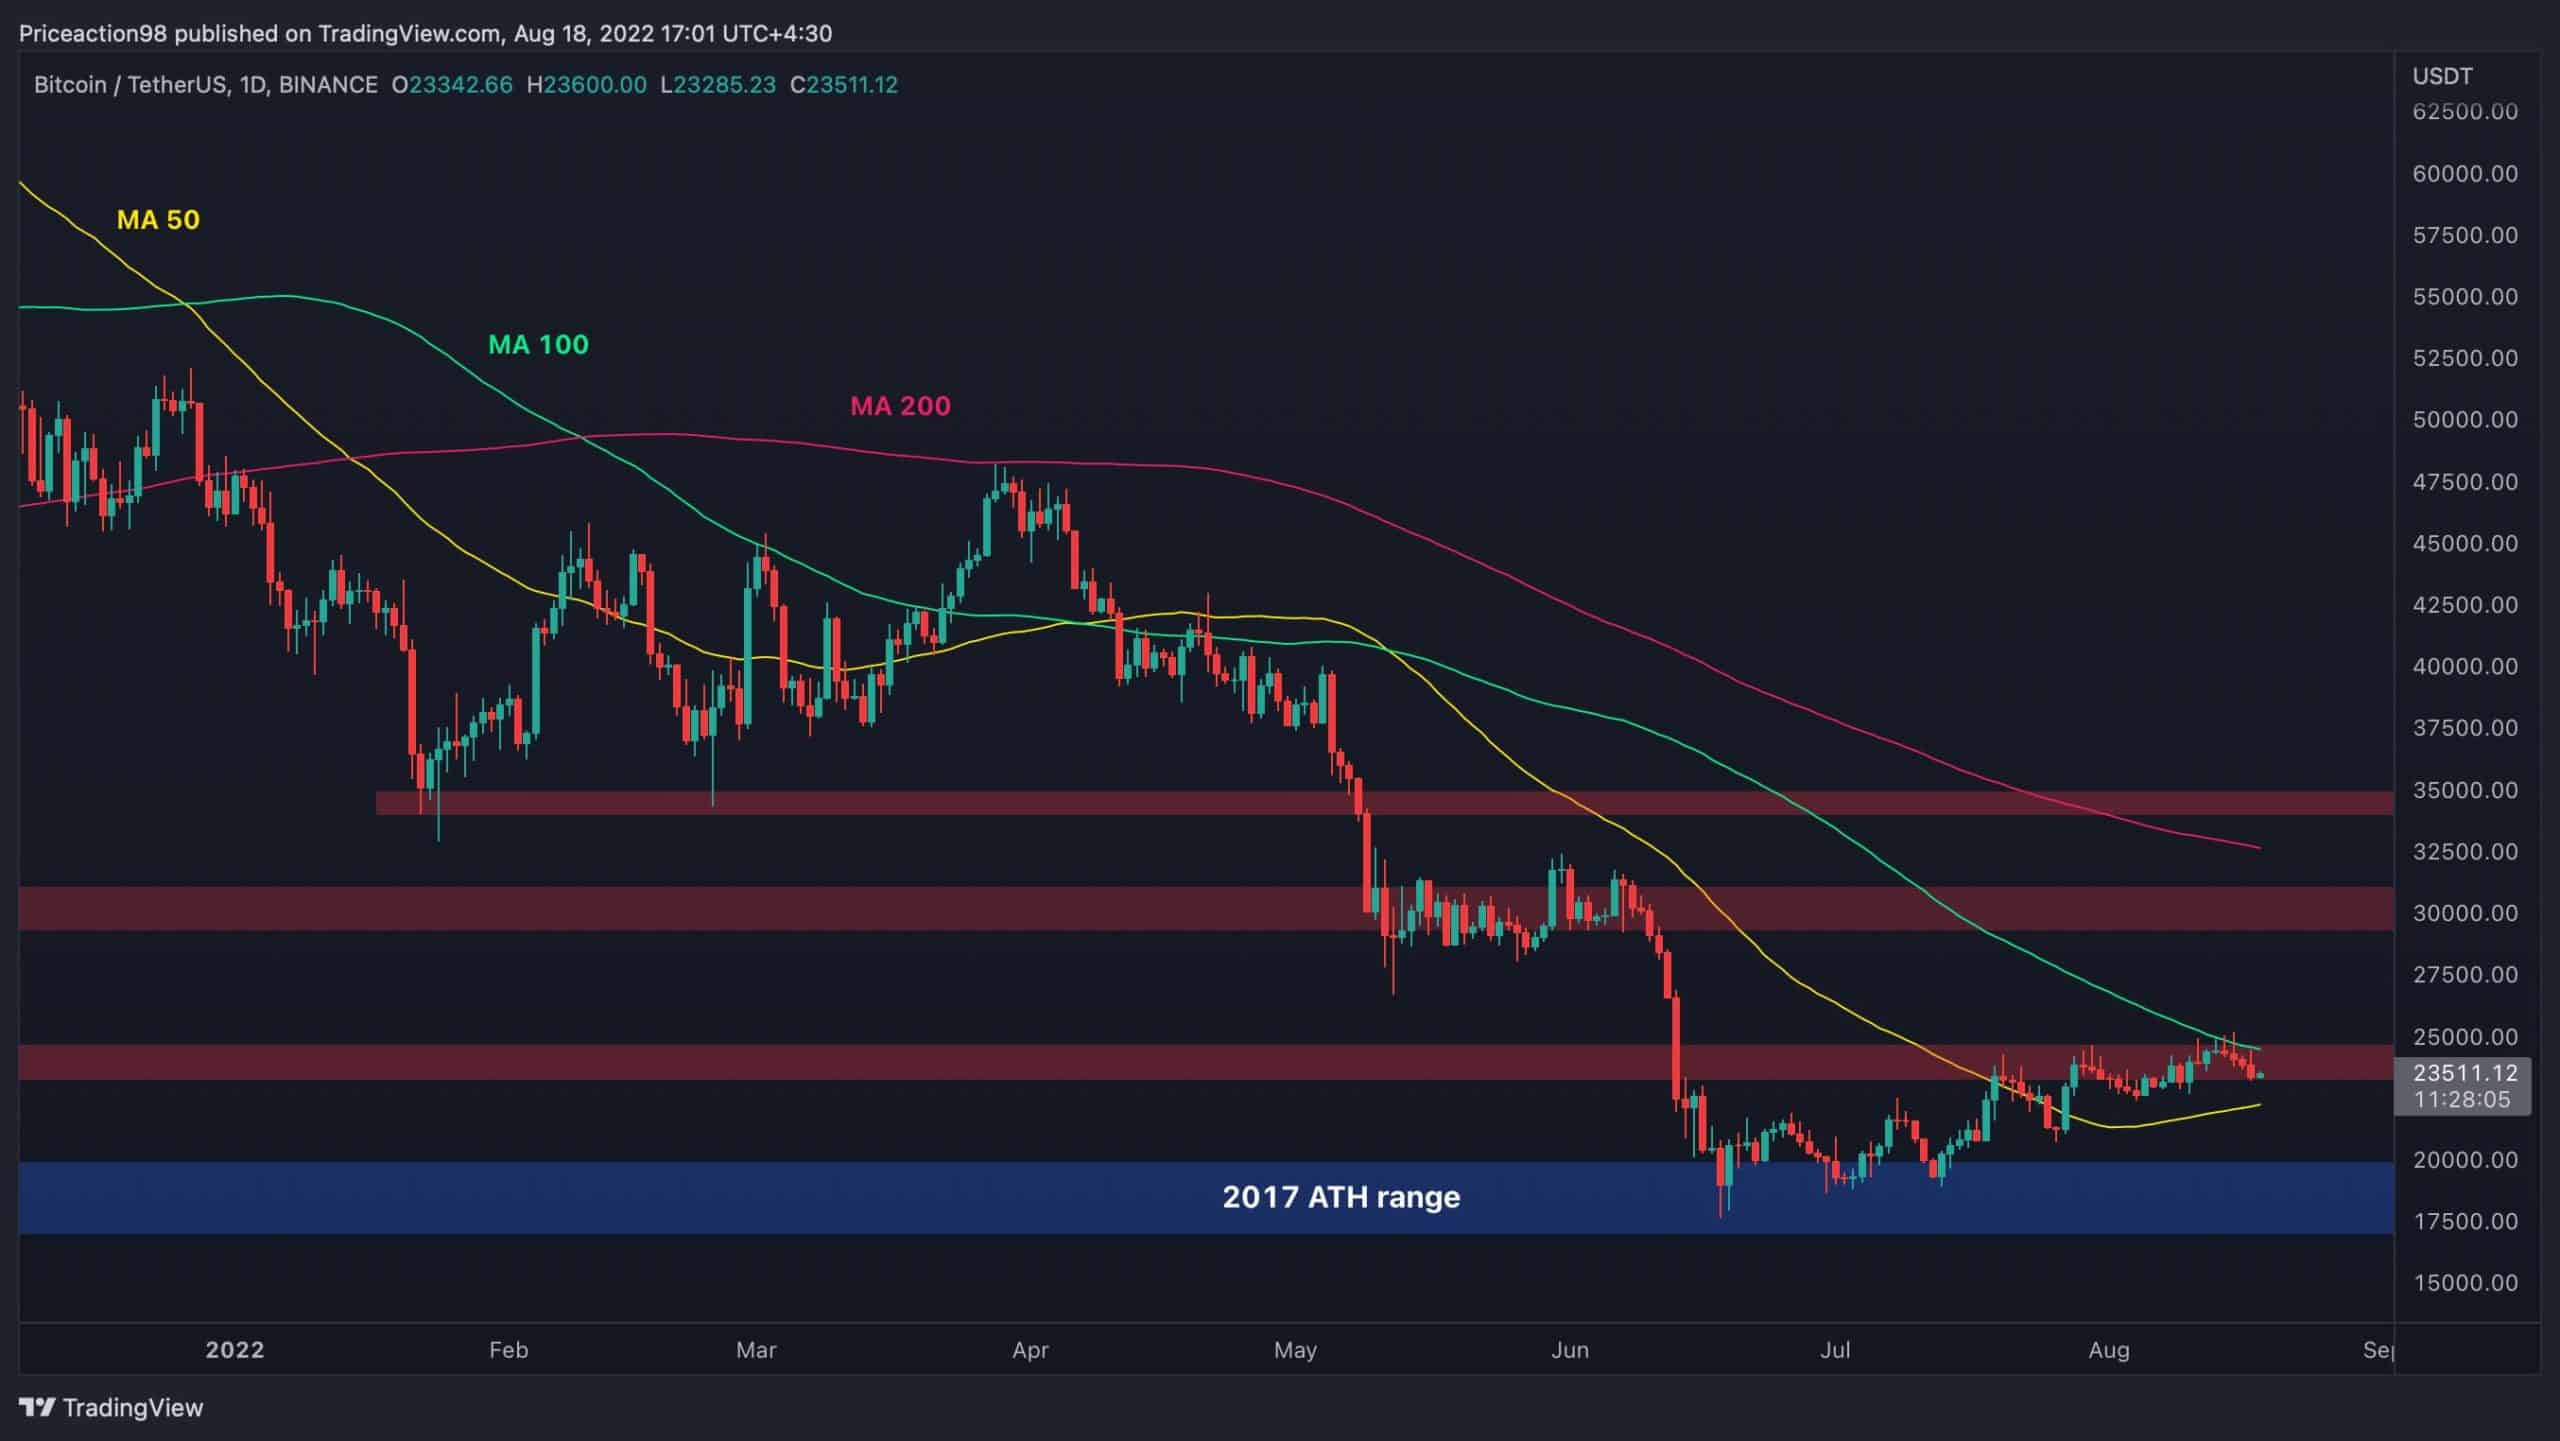 Btc-looking-for-direction-around-$23.5k-but-worrying-signs-appear-(bitcoin-price-analysis)